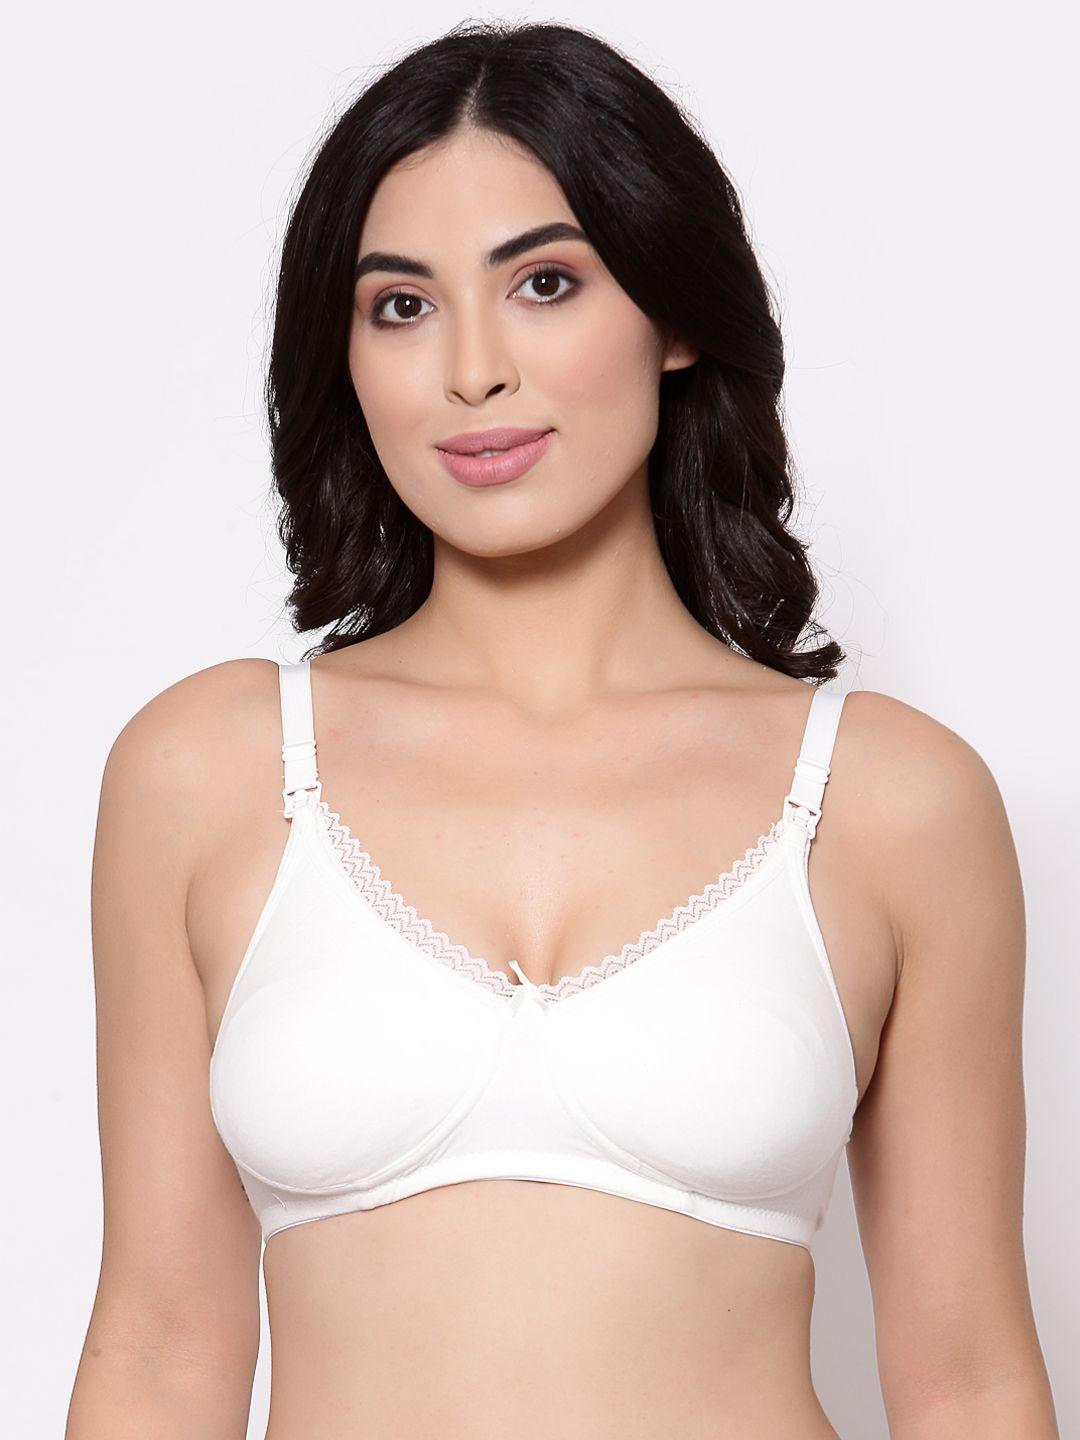 inner-sense-off-white-solid-organic-cotton-antimicrobial-sustainable-laced-soft-nursing-bra-aimb003e